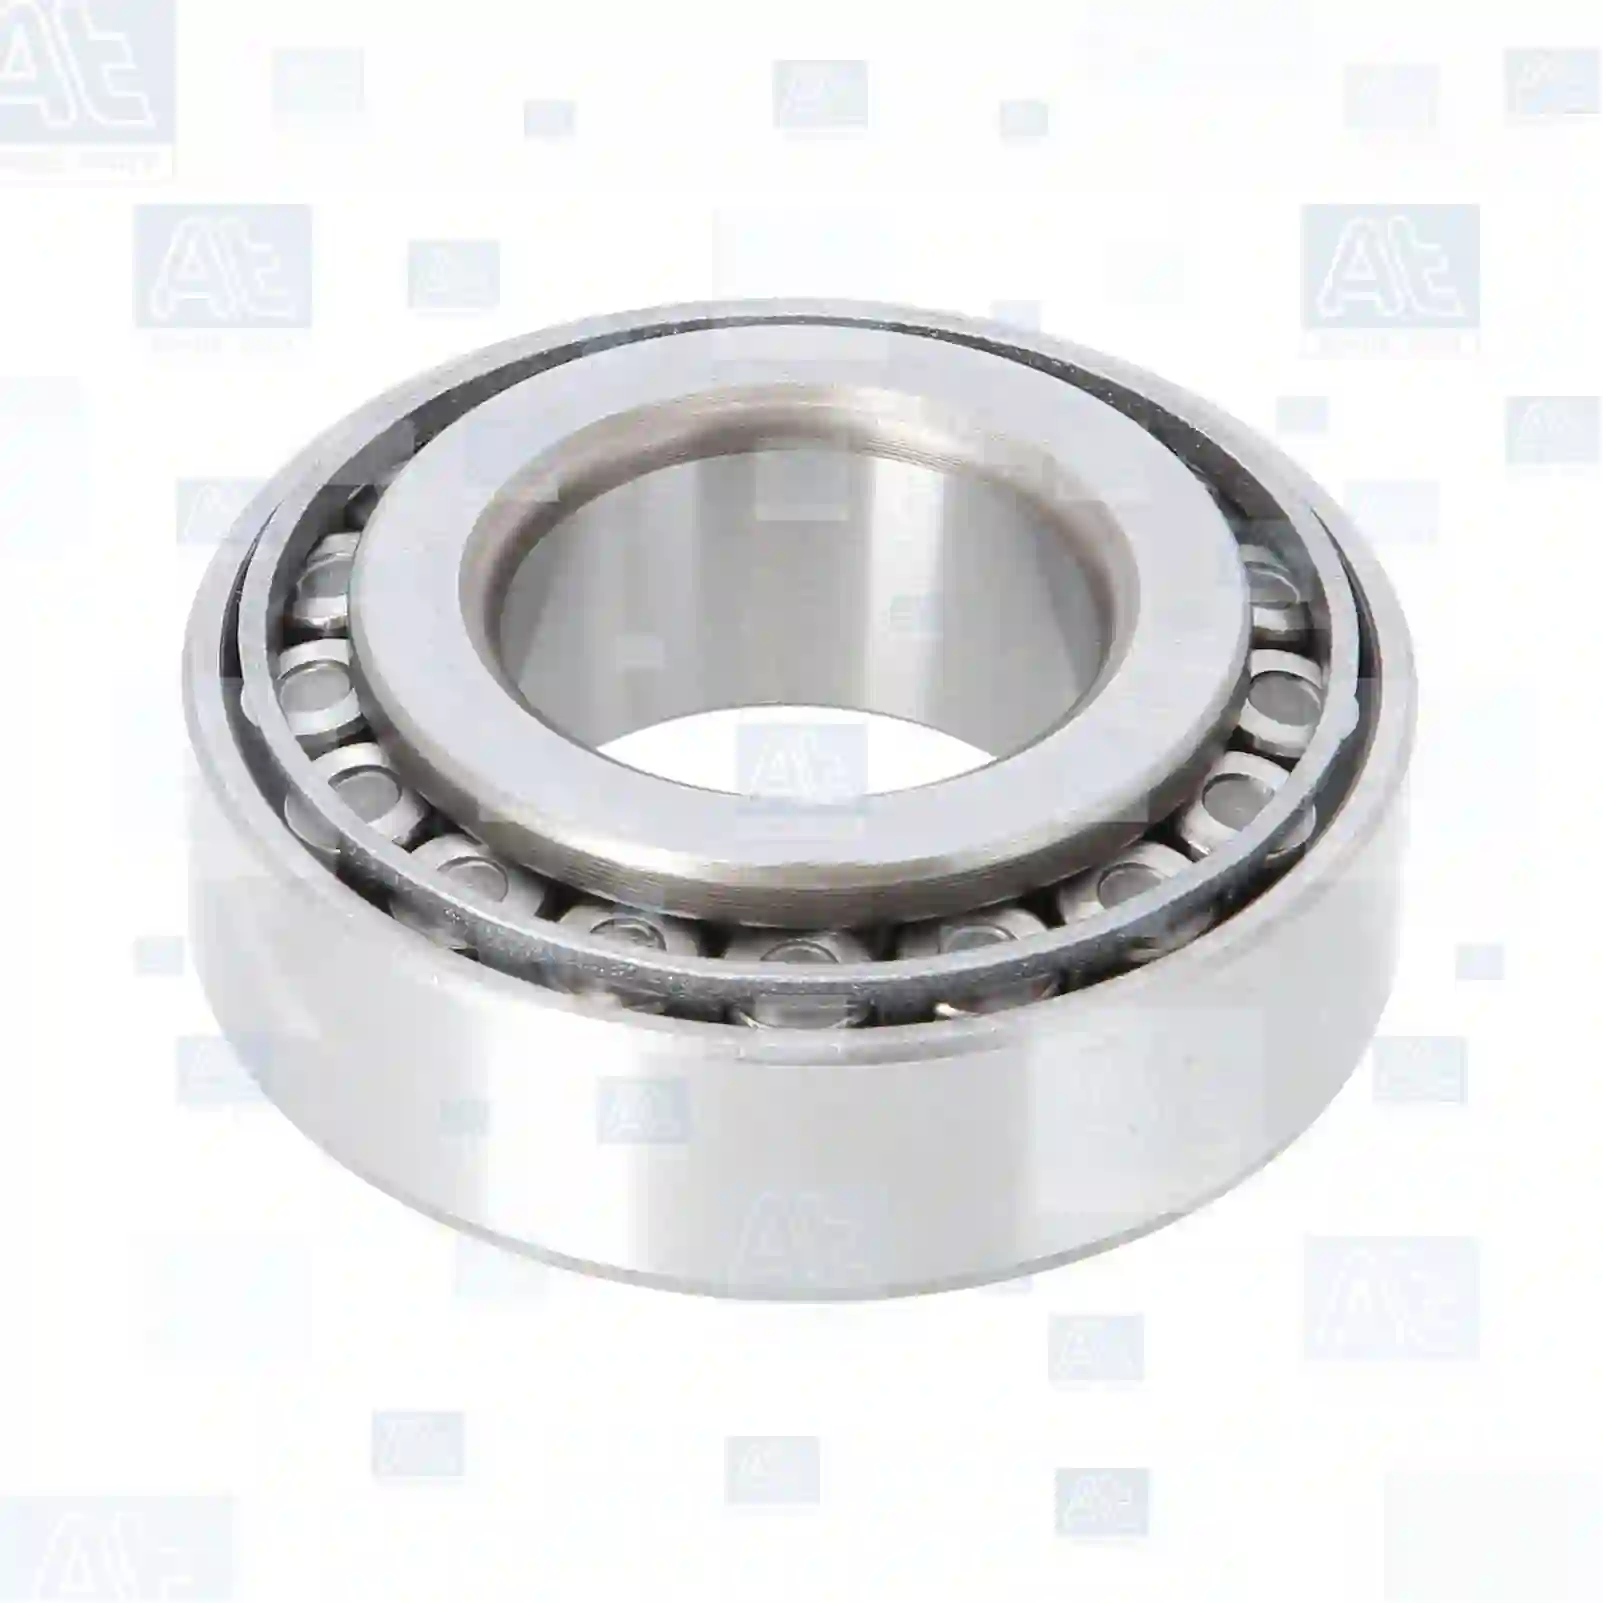 Tapered roller bearing, 77724604, 290062240, 373022, 373518, 373519, 620049, 620053, 0491899, 1344221, 1400078, 140078, 164670, 491899, NAK9186, 900436601700, TK4210416, 00814138, 05996248, 26800120, 94020002, 94205016, 94249643, 5-09812025-0, 5-09812026-0, 5-09812027-0, 8-94249643-2, 9-00032206-0, 01100000, 01110000, 01905272, 05996248, 08835016, 08857787, 00755-27210, 00632499006, 06324990066, 06324990080, 06342990066, A0023432206, A0773220600, 075527210, 805127142, 0009813105, 000720032206, 0019811505, 0019816105, 0019816505, 0029801302, 0079817605, MB025004, MH043145, 32273-M5100, 38120-18000, 38120-1KD0A, 466667, 373022, 373518, 373519, 620049, 620053, 0007732206, 0023336266, 0023432206, 0959232206, 5516010506, 5516016470, 5516016472, 7703090085, 123631, 183583, 19553, 6601861, 7019553, ZG03022-0008 ||  77724604 At Spare Part | Engine, Accelerator Pedal, Camshaft, Connecting Rod, Crankcase, Crankshaft, Cylinder Head, Engine Suspension Mountings, Exhaust Manifold, Exhaust Gas Recirculation, Filter Kits, Flywheel Housing, General Overhaul Kits, Engine, Intake Manifold, Oil Cleaner, Oil Cooler, Oil Filter, Oil Pump, Oil Sump, Piston & Liner, Sensor & Switch, Timing Case, Turbocharger, Cooling System, Belt Tensioner, Coolant Filter, Coolant Pipe, Corrosion Prevention Agent, Drive, Expansion Tank, Fan, Intercooler, Monitors & Gauges, Radiator, Thermostat, V-Belt / Timing belt, Water Pump, Fuel System, Electronical Injector Unit, Feed Pump, Fuel Filter, cpl., Fuel Gauge Sender,  Fuel Line, Fuel Pump, Fuel Tank, Injection Line Kit, Injection Pump, Exhaust System, Clutch & Pedal, Gearbox, Propeller Shaft, Axles, Brake System, Hubs & Wheels, Suspension, Leaf Spring, Universal Parts / Accessories, Steering, Electrical System, Cabin Tapered roller bearing, 77724604, 290062240, 373022, 373518, 373519, 620049, 620053, 0491899, 1344221, 1400078, 140078, 164670, 491899, NAK9186, 900436601700, TK4210416, 00814138, 05996248, 26800120, 94020002, 94205016, 94249643, 5-09812025-0, 5-09812026-0, 5-09812027-0, 8-94249643-2, 9-00032206-0, 01100000, 01110000, 01905272, 05996248, 08835016, 08857787, 00755-27210, 00632499006, 06324990066, 06324990080, 06342990066, A0023432206, A0773220600, 075527210, 805127142, 0009813105, 000720032206, 0019811505, 0019816105, 0019816505, 0029801302, 0079817605, MB025004, MH043145, 32273-M5100, 38120-18000, 38120-1KD0A, 466667, 373022, 373518, 373519, 620049, 620053, 0007732206, 0023336266, 0023432206, 0959232206, 5516010506, 5516016470, 5516016472, 7703090085, 123631, 183583, 19553, 6601861, 7019553, ZG03022-0008 ||  77724604 At Spare Part | Engine, Accelerator Pedal, Camshaft, Connecting Rod, Crankcase, Crankshaft, Cylinder Head, Engine Suspension Mountings, Exhaust Manifold, Exhaust Gas Recirculation, Filter Kits, Flywheel Housing, General Overhaul Kits, Engine, Intake Manifold, Oil Cleaner, Oil Cooler, Oil Filter, Oil Pump, Oil Sump, Piston & Liner, Sensor & Switch, Timing Case, Turbocharger, Cooling System, Belt Tensioner, Coolant Filter, Coolant Pipe, Corrosion Prevention Agent, Drive, Expansion Tank, Fan, Intercooler, Monitors & Gauges, Radiator, Thermostat, V-Belt / Timing belt, Water Pump, Fuel System, Electronical Injector Unit, Feed Pump, Fuel Filter, cpl., Fuel Gauge Sender,  Fuel Line, Fuel Pump, Fuel Tank, Injection Line Kit, Injection Pump, Exhaust System, Clutch & Pedal, Gearbox, Propeller Shaft, Axles, Brake System, Hubs & Wheels, Suspension, Leaf Spring, Universal Parts / Accessories, Steering, Electrical System, Cabin